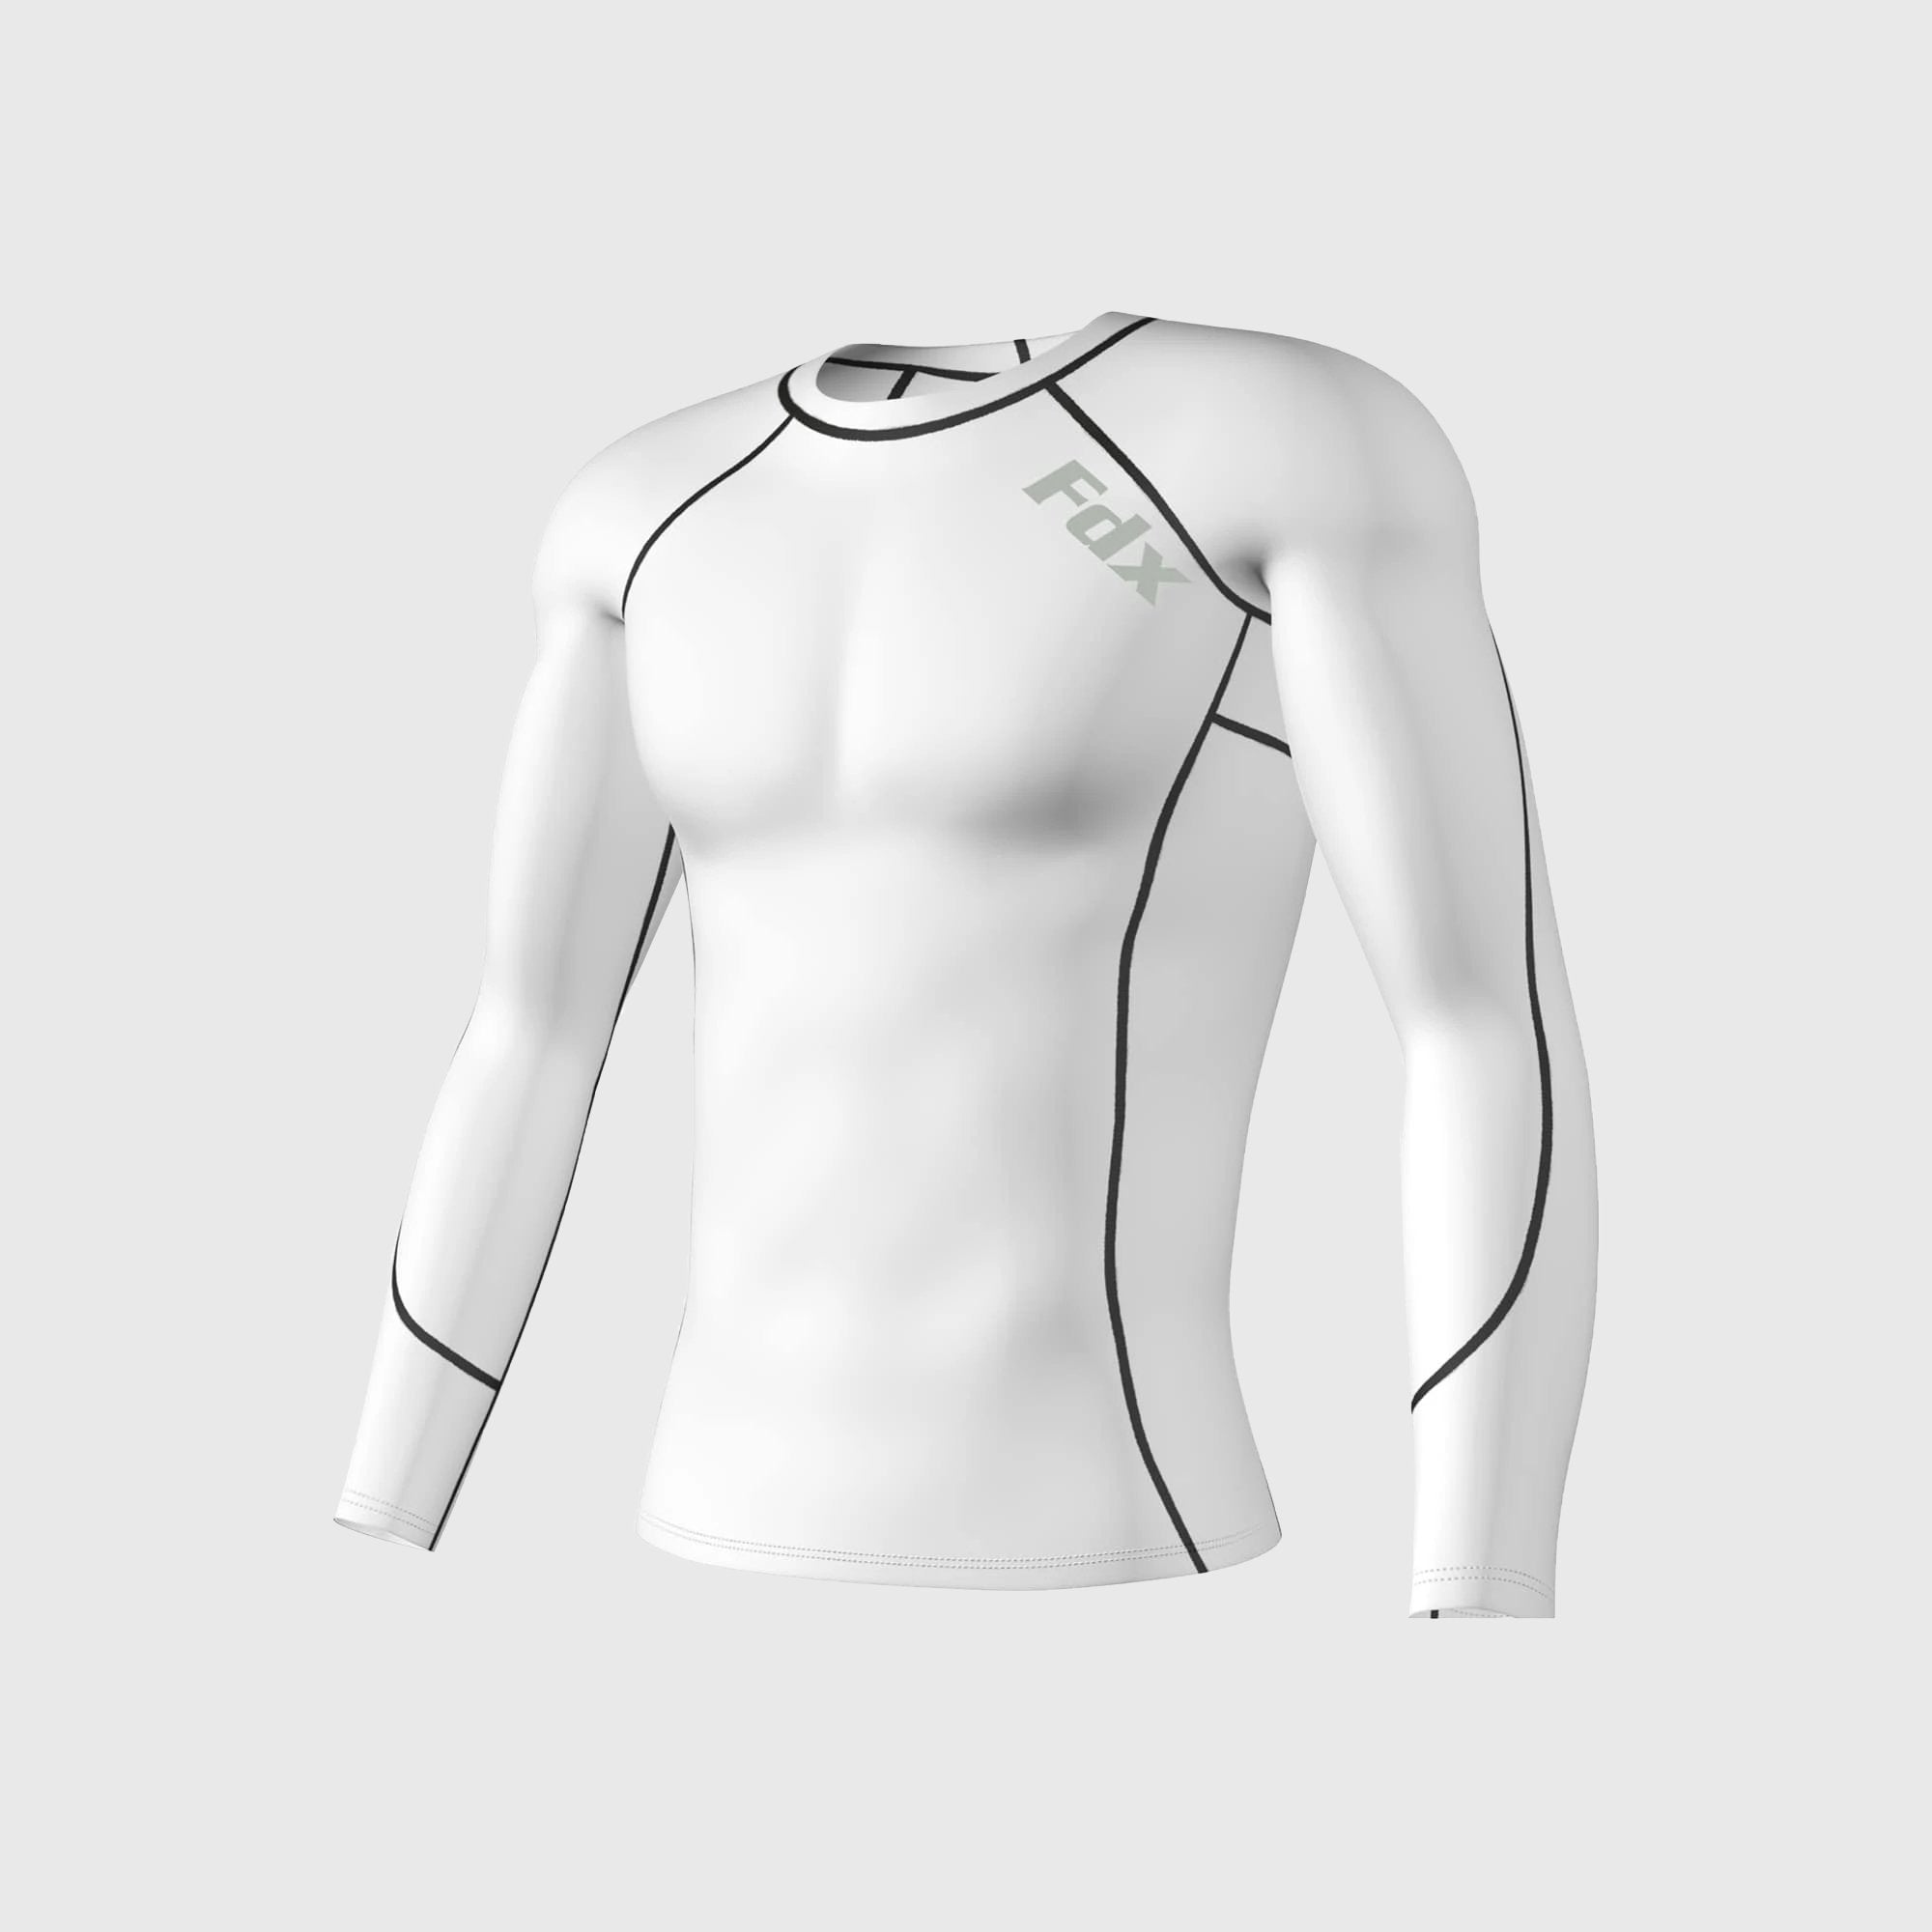 Fdx Cosmic White Men's Compression Thermal Winter Base Layer Shirt